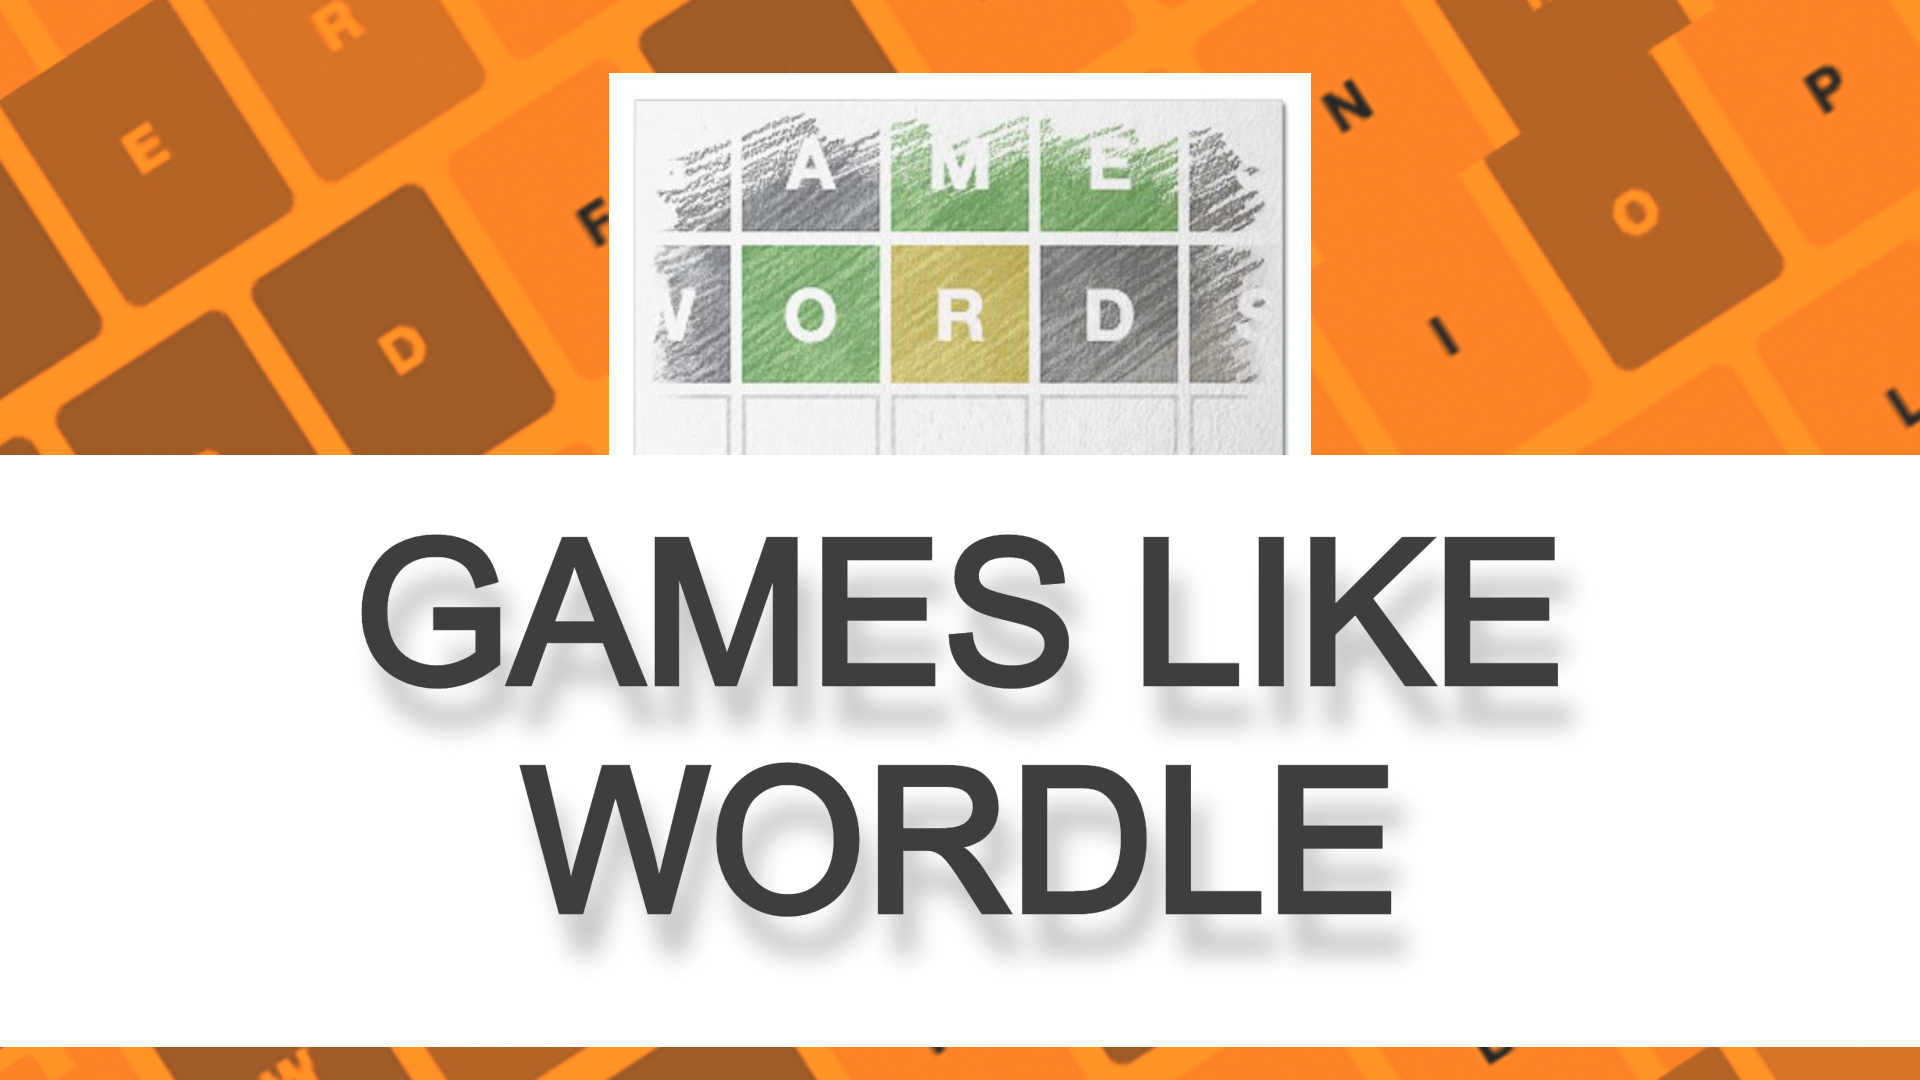 10 games like Wordle, from Pokémon-guessing to dirty word(le)s